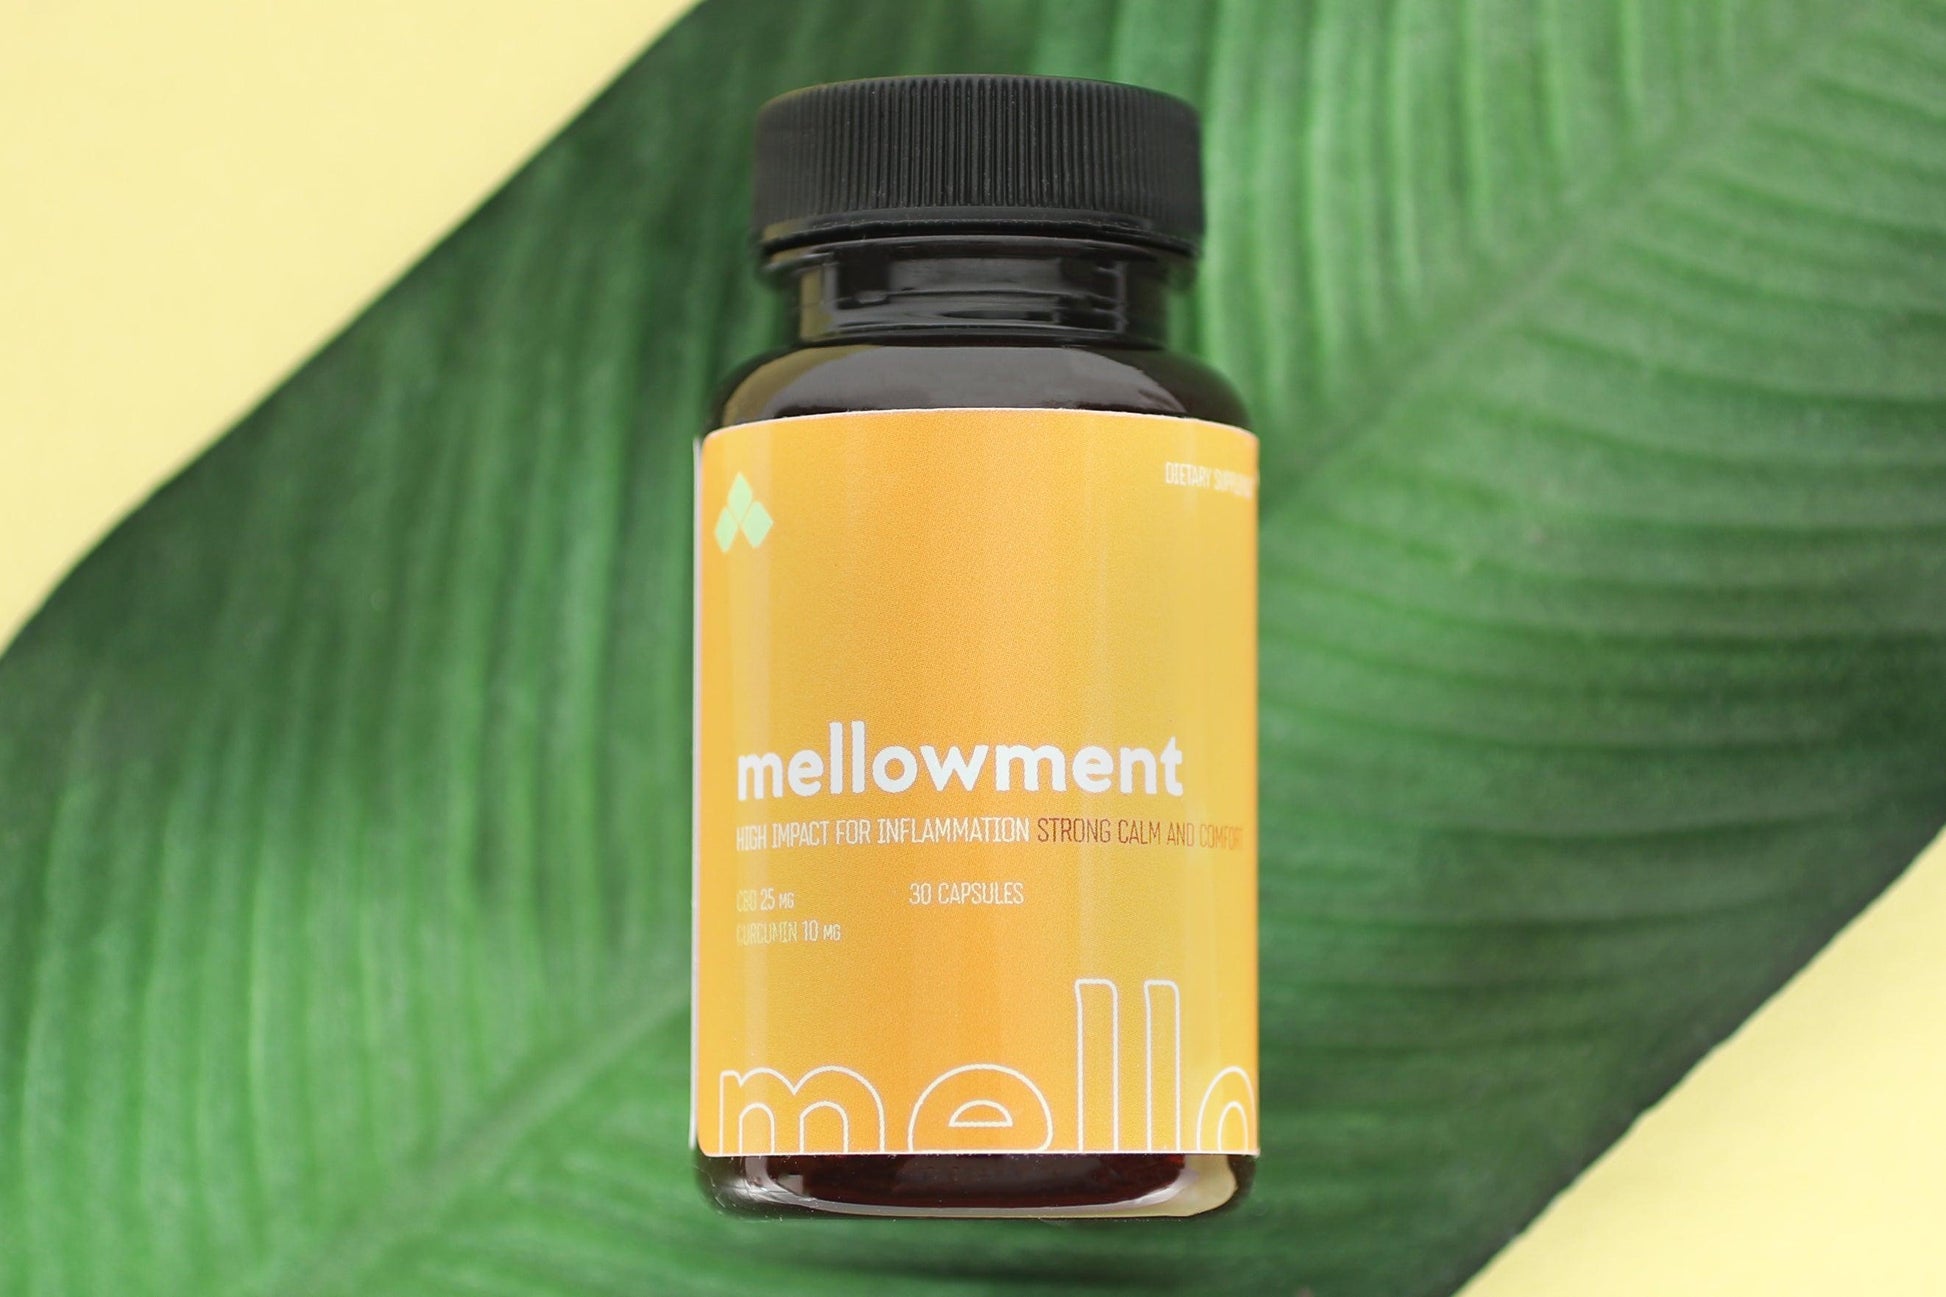 CBD Supplement (8 styles) - Photography and Web Design - Los Angeles, US based Shopify Experts Revo Designs